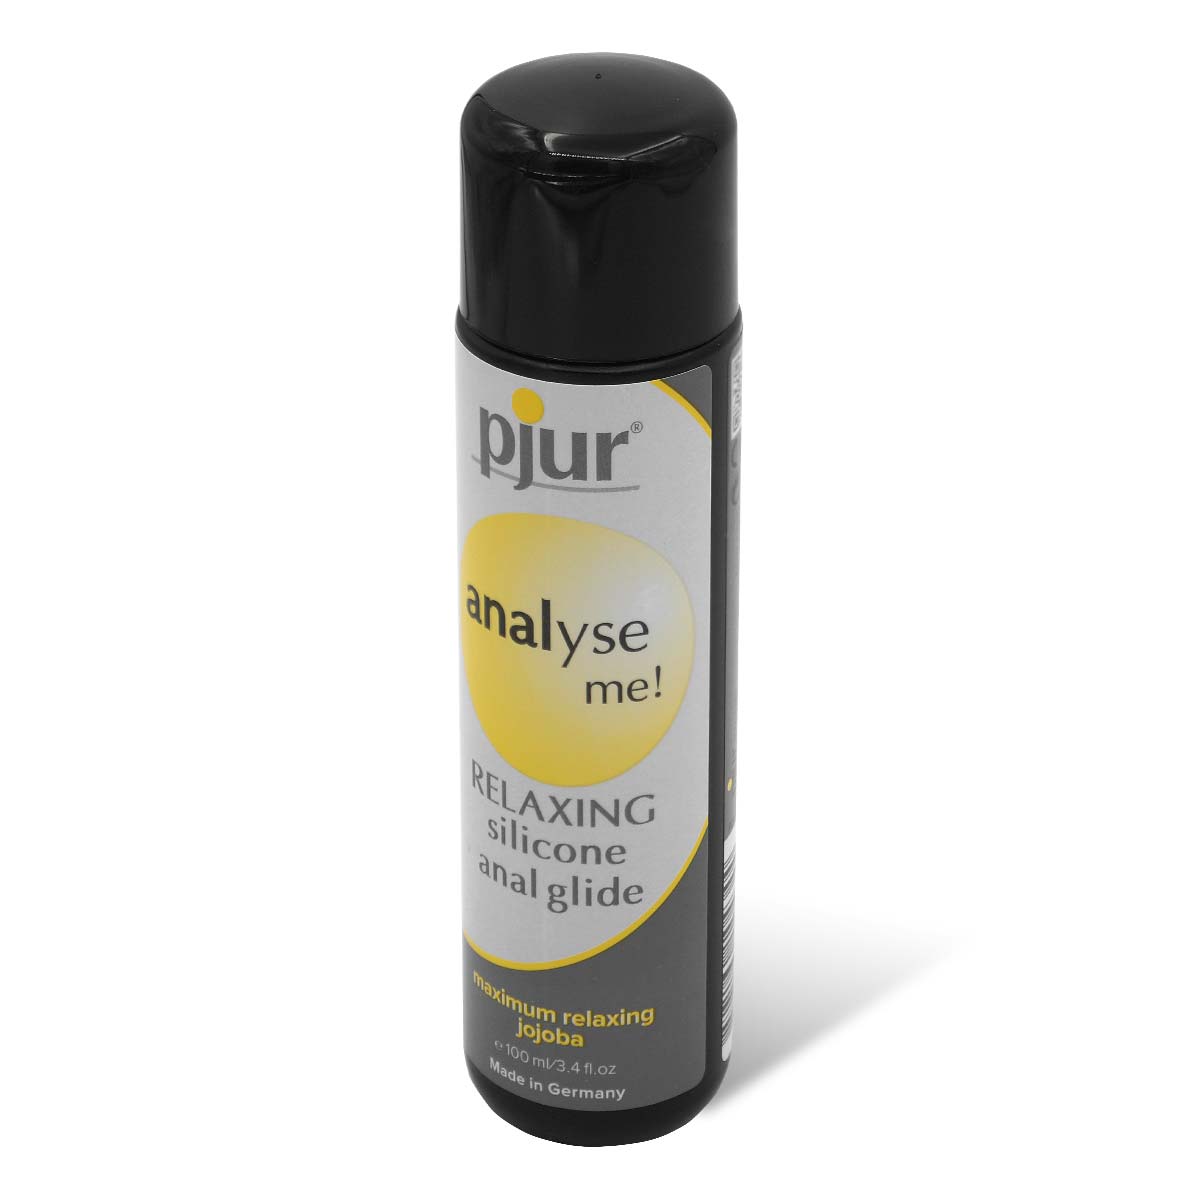 pjur analyse me! RELAXING Silicone Anal Glide 100ml Silicone-based Lubricant-p_1